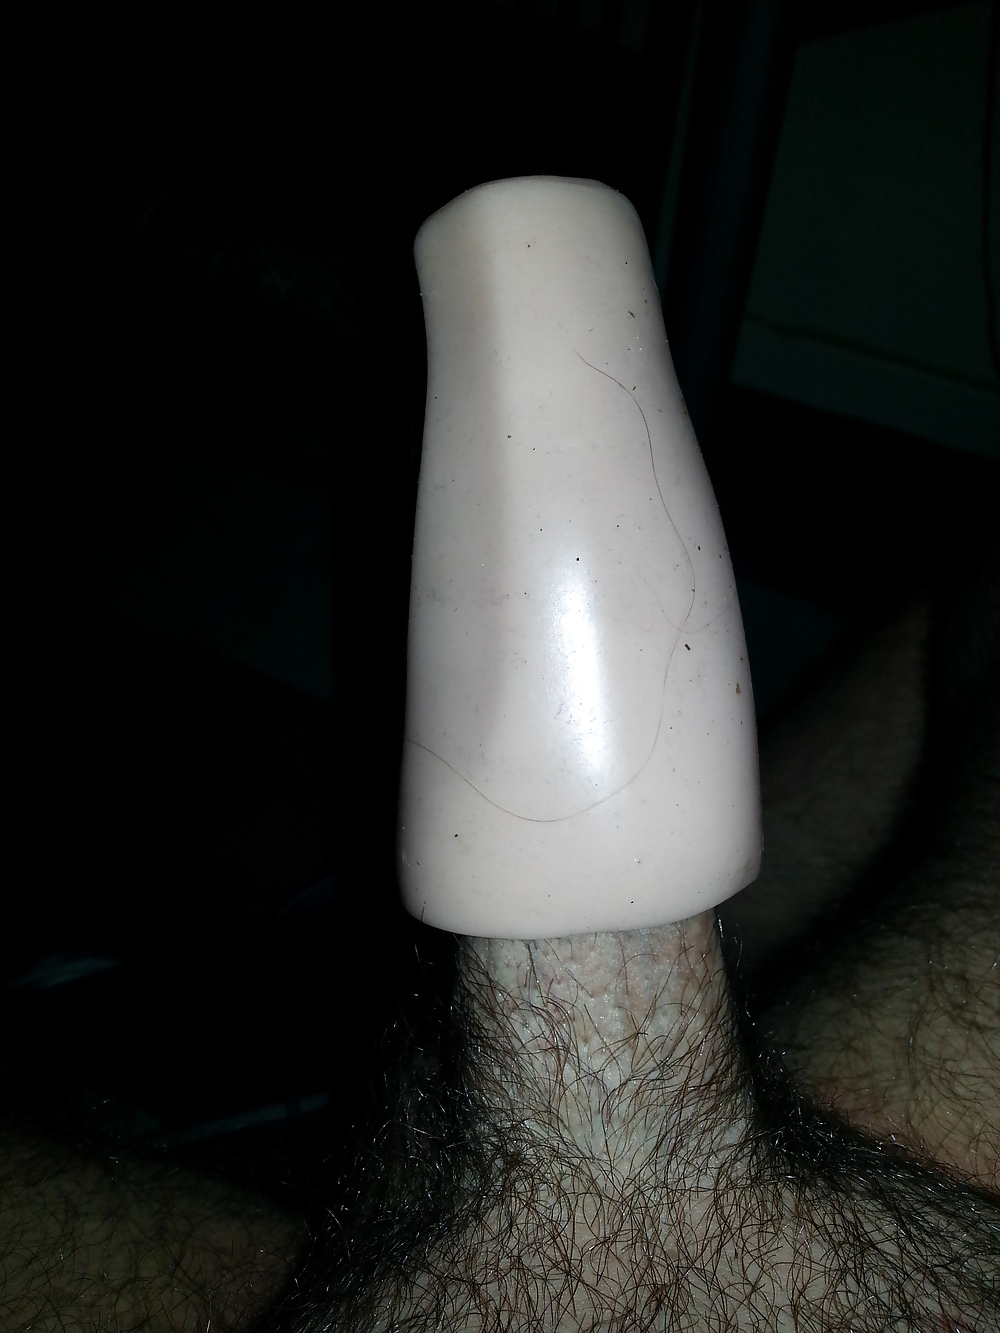 Using some of my sex toys #23779565